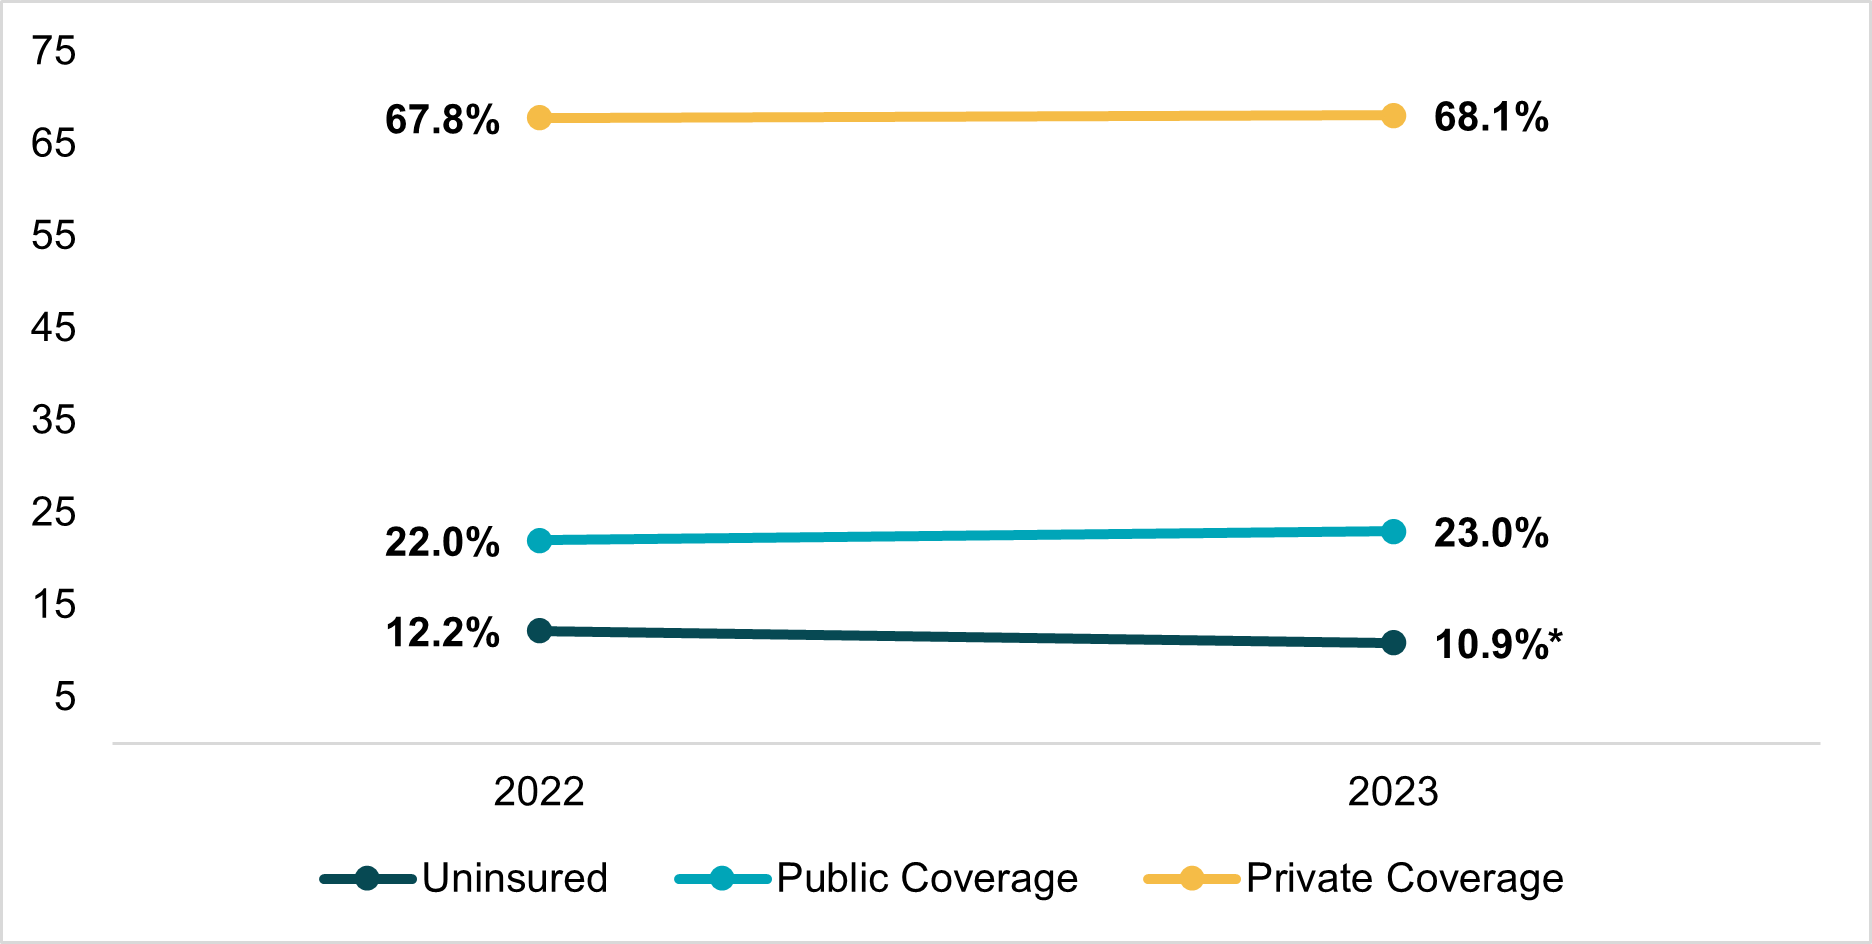 trend line graph of health insurance coverage rates for public private and uninsured nonelderly adults in the United States